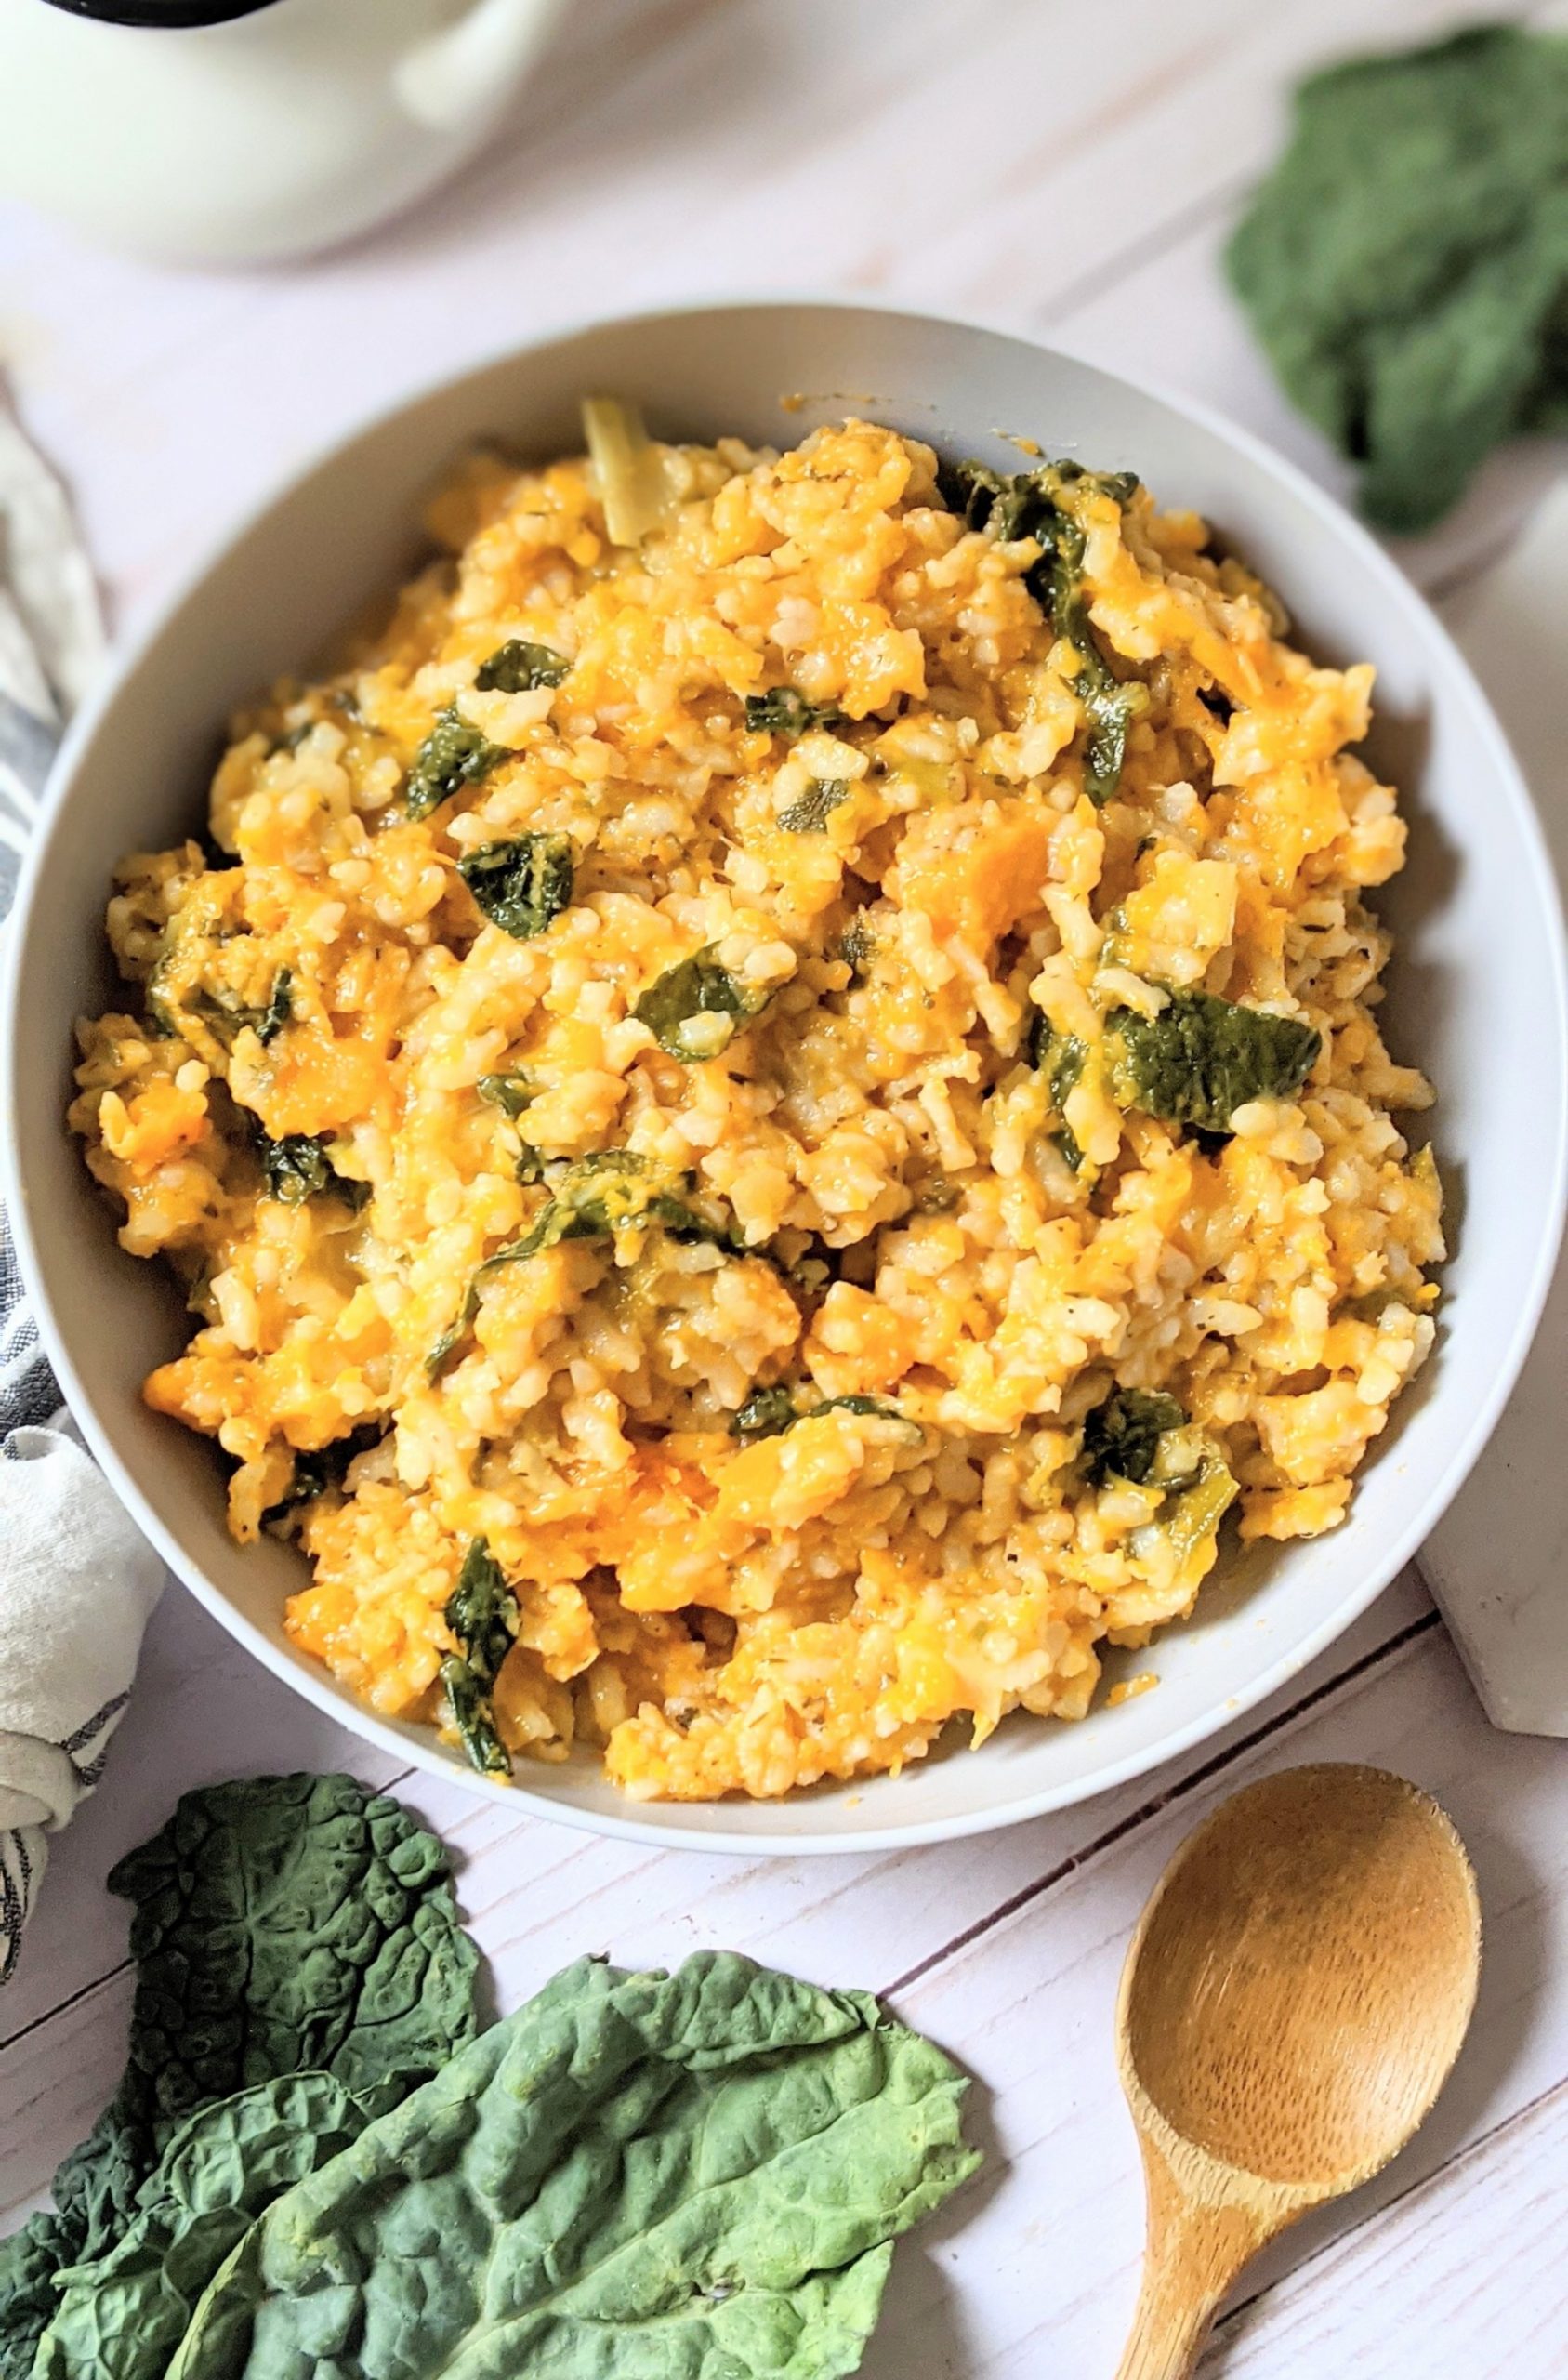 gluten free butternut squash risotto recipe with kale squash italian rice dinner ideas with butternut squash italian recipes healthy vegetarian